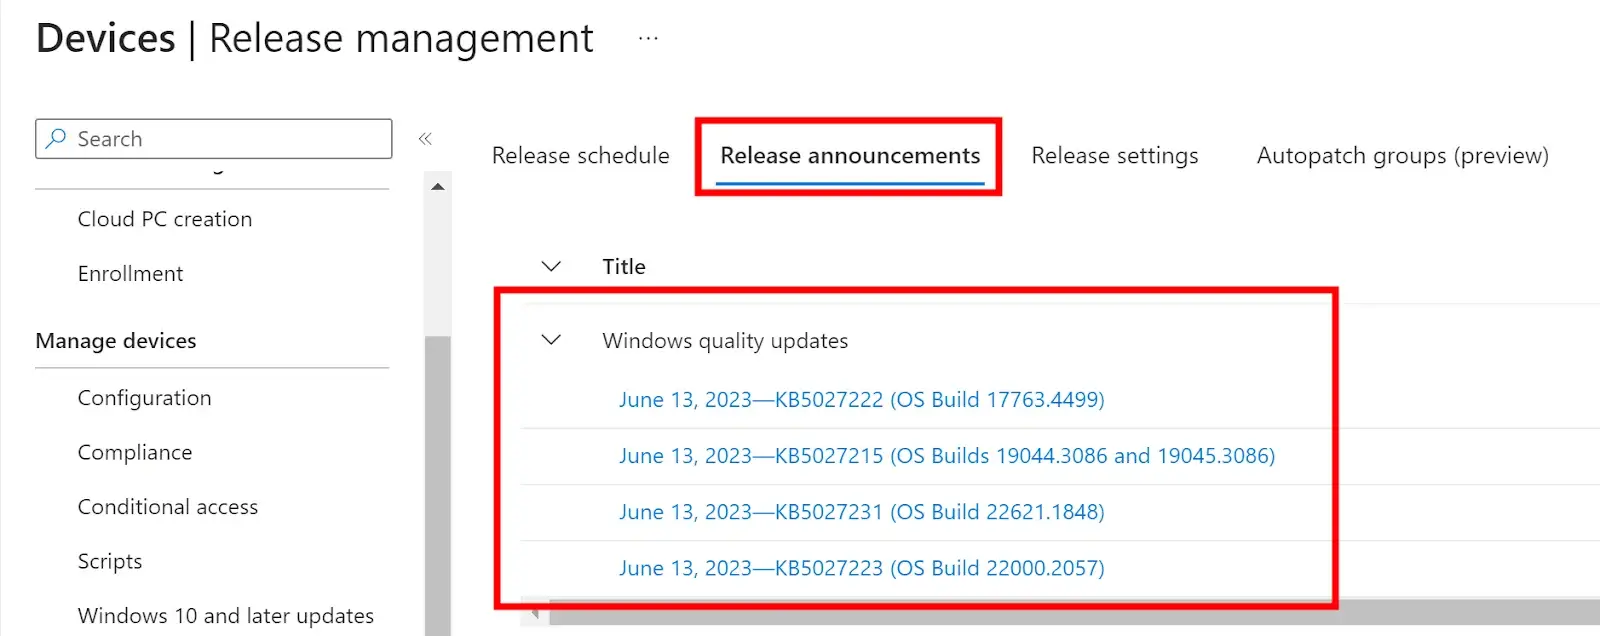 Release Schedule allows you to customize your deployment schedules for Windows Quality and Feature Updates.